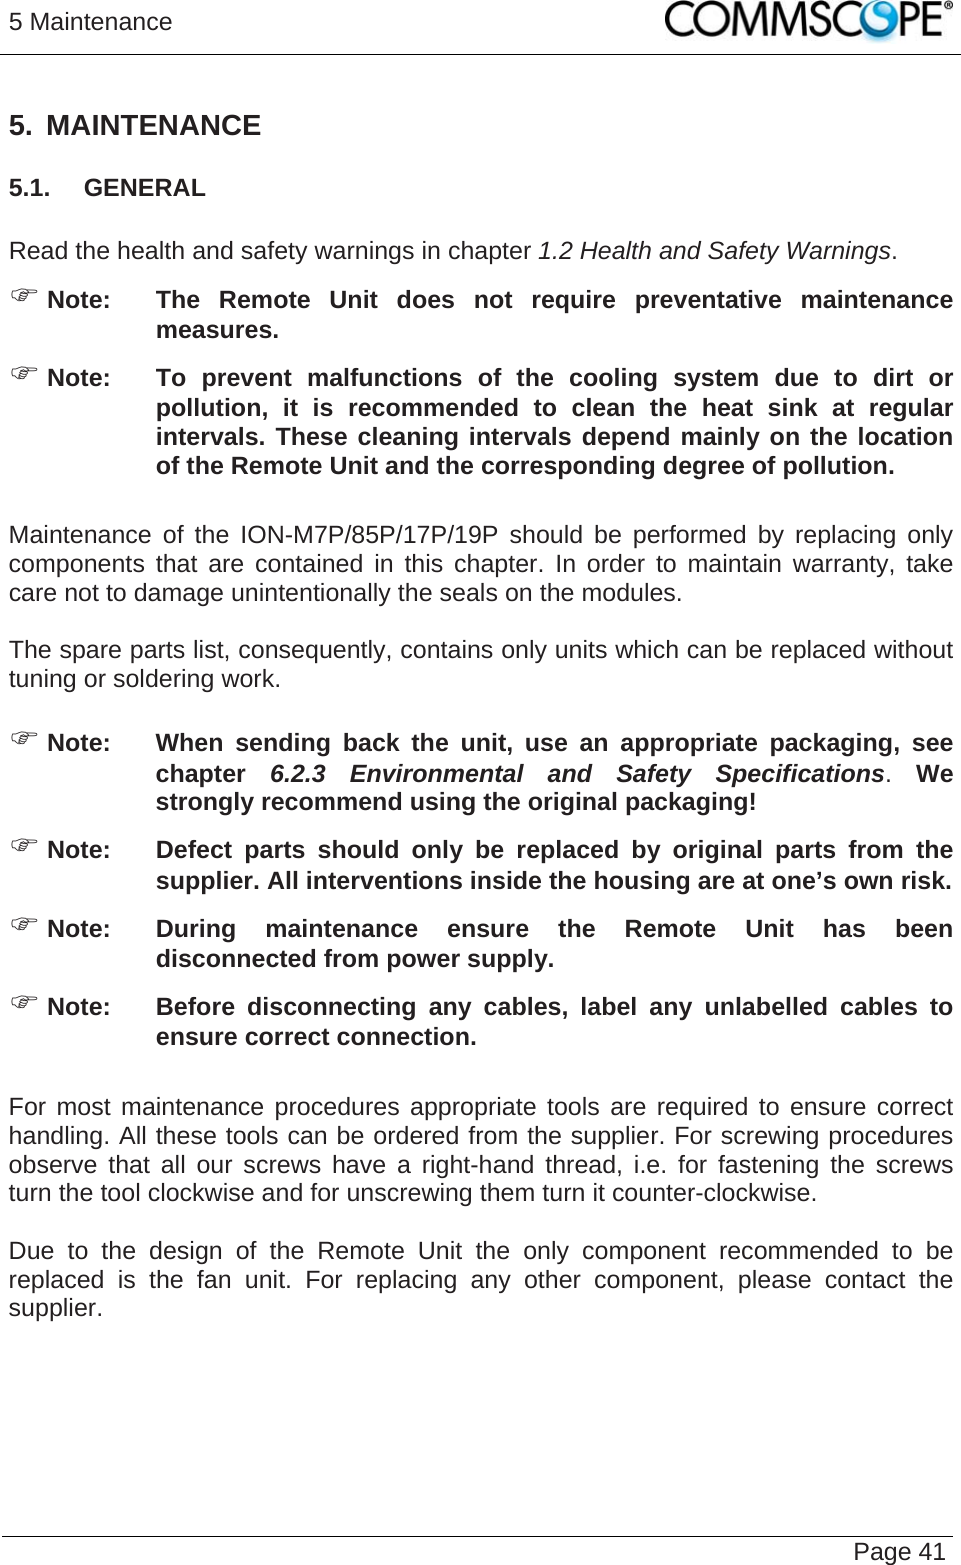 5 Maintenance   Page 41 5. MAINTENANCE 5.1.  GENERAL  Read the health and safety warnings in chapter 1.2 Health and Safety Warnings. ) Note:  The Remote Unit does not require preventative maintenance measures. ) Note:  To prevent malfunctions of the cooling system due to dirt or pollution, it is recommended to clean the heat sink at regular intervals. These cleaning intervals depend mainly on the location of the Remote Unit and the corresponding degree of pollution.  Maintenance of the ION-M7P/85P/17P/19P should be performed by replacing only components that are contained in this chapter. In order to maintain warranty, take care not to damage unintentionally the seals on the modules.  The spare parts list, consequently, contains only units which can be replaced without tuning or soldering work.  ) Note:  When sending back the unit, use an appropriate packaging, see chapter  6.2.3 Environmental and Safety Specifications. We strongly recommend using the original packaging! ) Note:  Defect parts should only be replaced by original parts from the supplier. All interventions inside the housing are at one’s own risk. ) Note:  During maintenance ensure the Remote Unit has been disconnected from power supply. ) Note:  Before disconnecting any cables, label any unlabelled cables to ensure correct connection.  For most maintenance procedures appropriate tools are required to ensure correct handling. All these tools can be ordered from the supplier. For screwing procedures observe that all our screws have a right-hand thread, i.e. for fastening the screws turn the tool clockwise and for unscrewing them turn it counter-clockwise.  Due to the design of the Remote Unit the only component recommended to be replaced is the fan unit. For replacing any other component, please contact the supplier.  